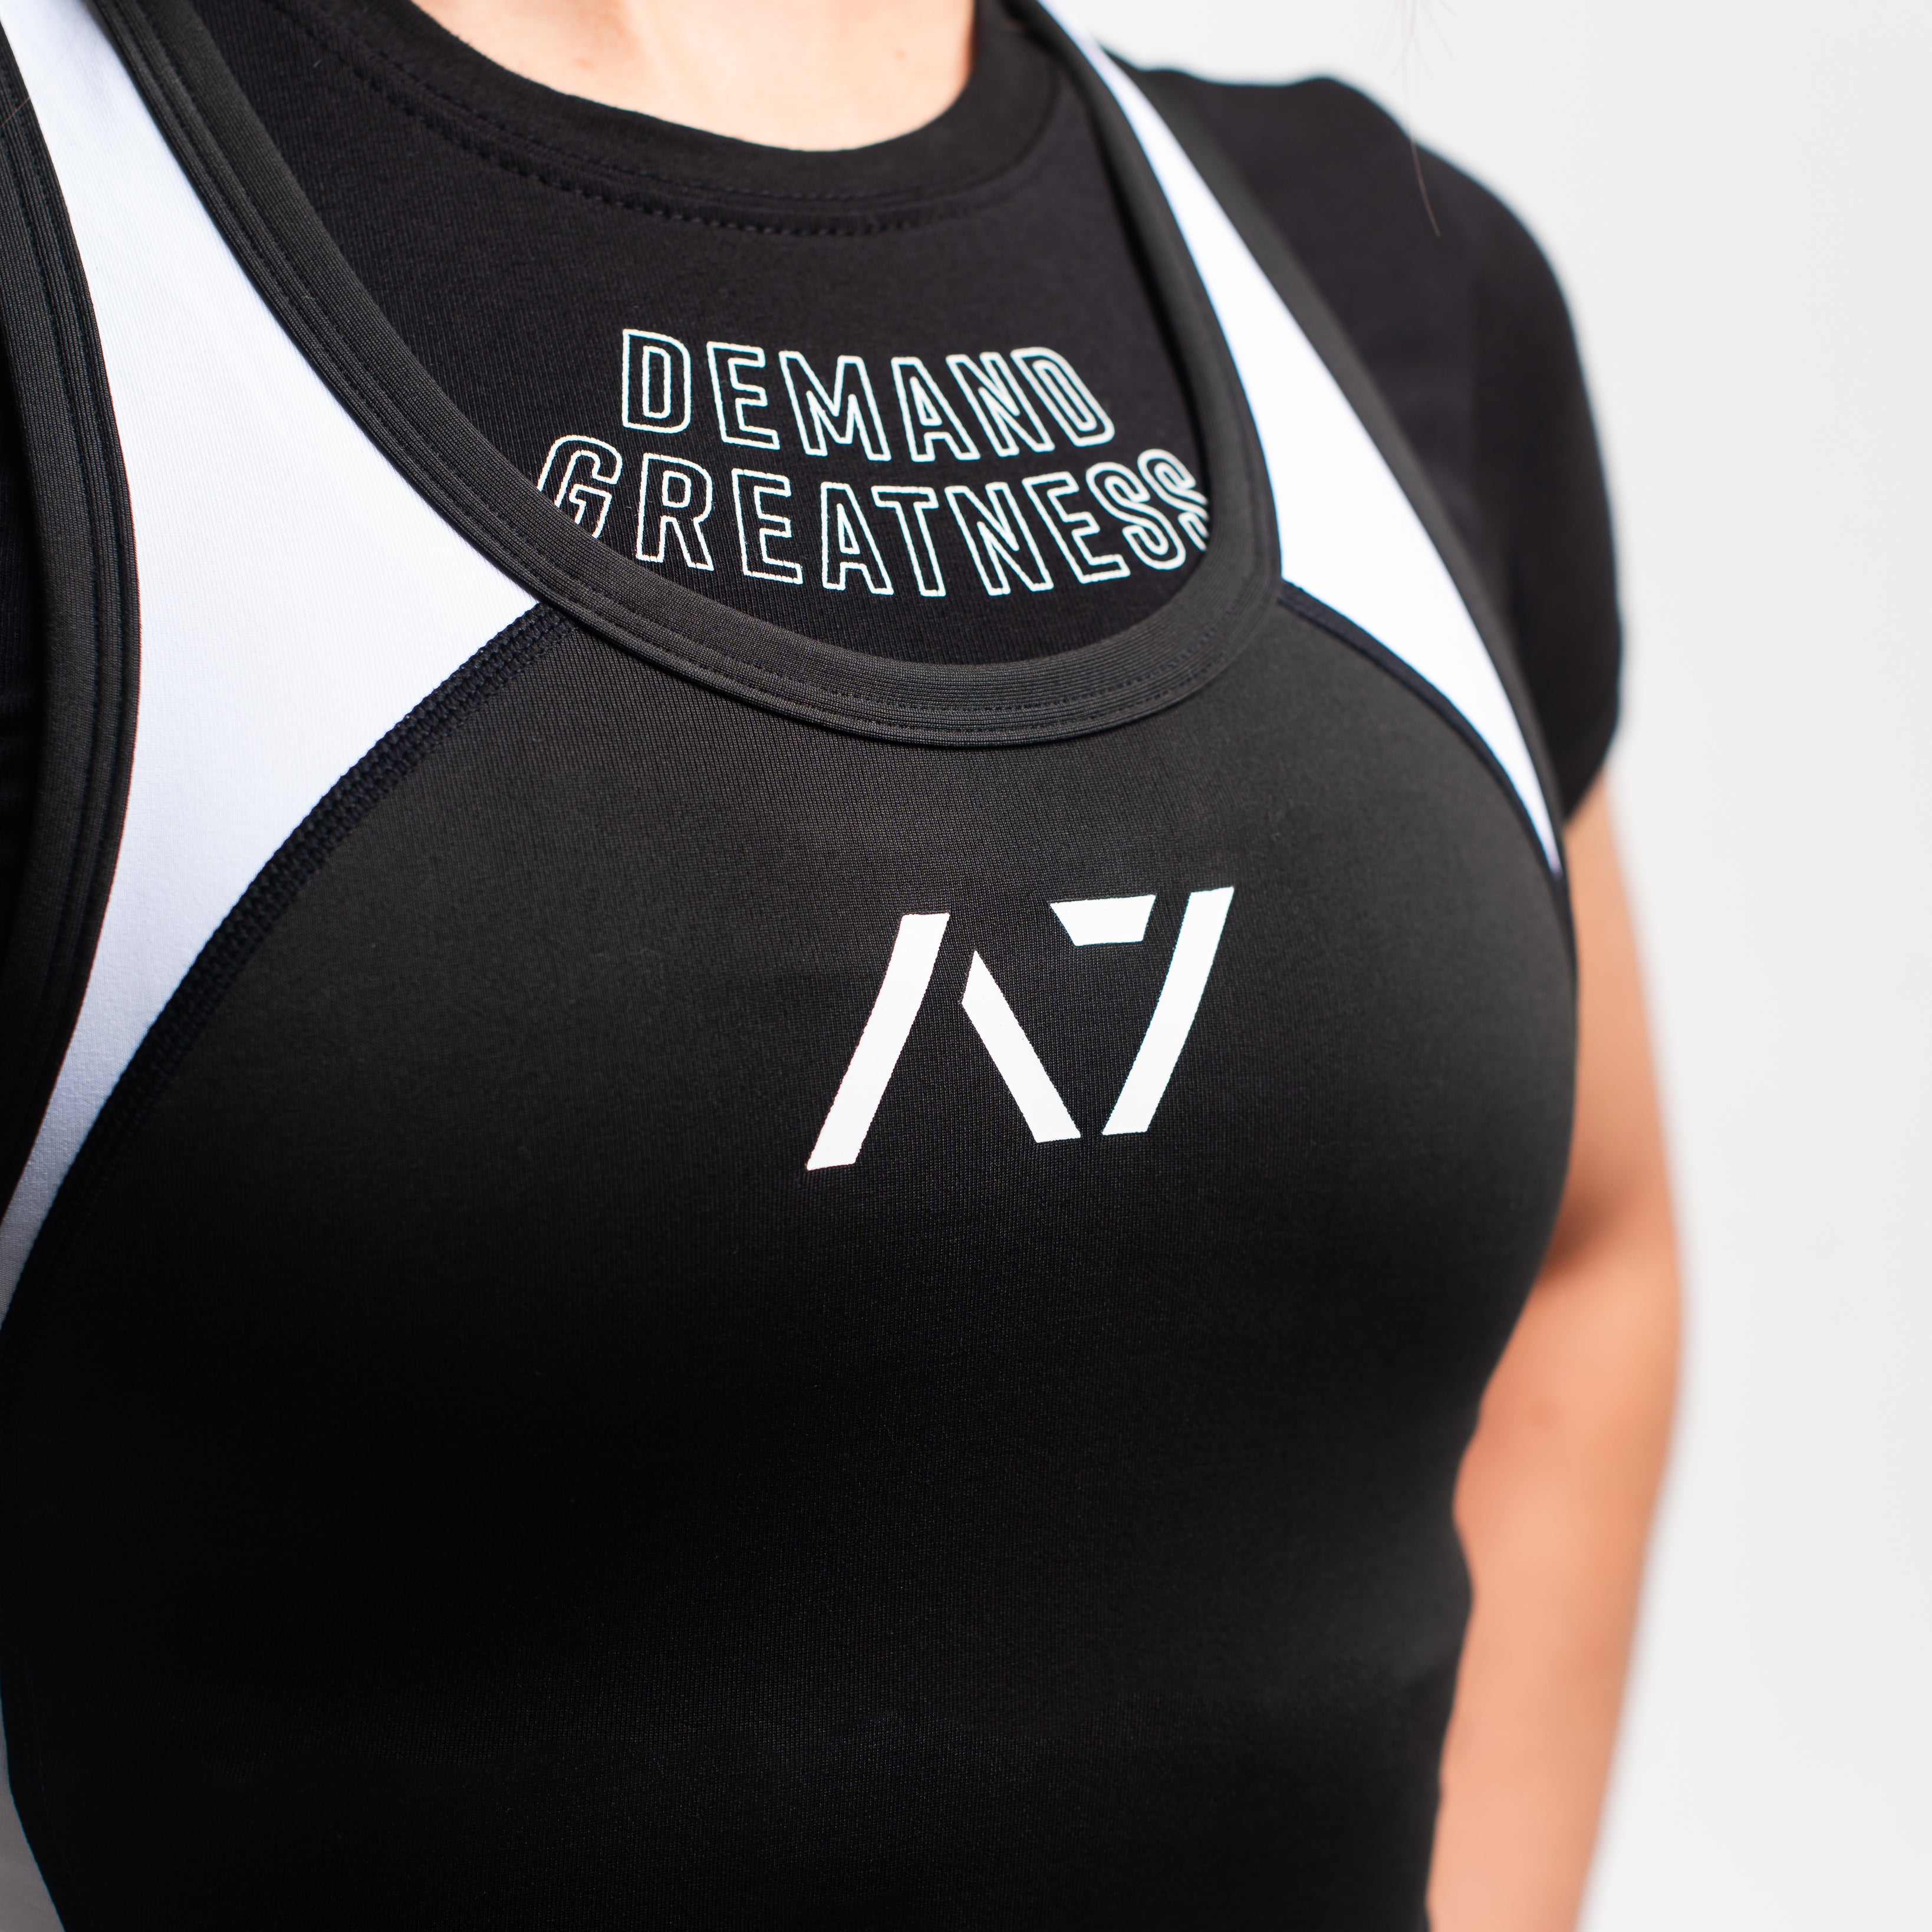 A7 IPF Approved Domino Luno singlet features extra lat mobility, side panel stitching to guide the squat depth level and curved panel design for a slimming look. The Women's cut singlet features a tapered waist and additional quad room. The IPF Approved Kit includes Powerlifting Singlet, A7 Meet Shirt, A7 Zebra Wrist Wraps, A7 Deadlift Socks, Hourglass Knee Sleeves (Stiff Knee Sleeves and Rigor Mortis Knee Sleeves). Genouillères powerlifting shipping to France, Spain, Ireland, Germany, Italy, Sweden and EU.